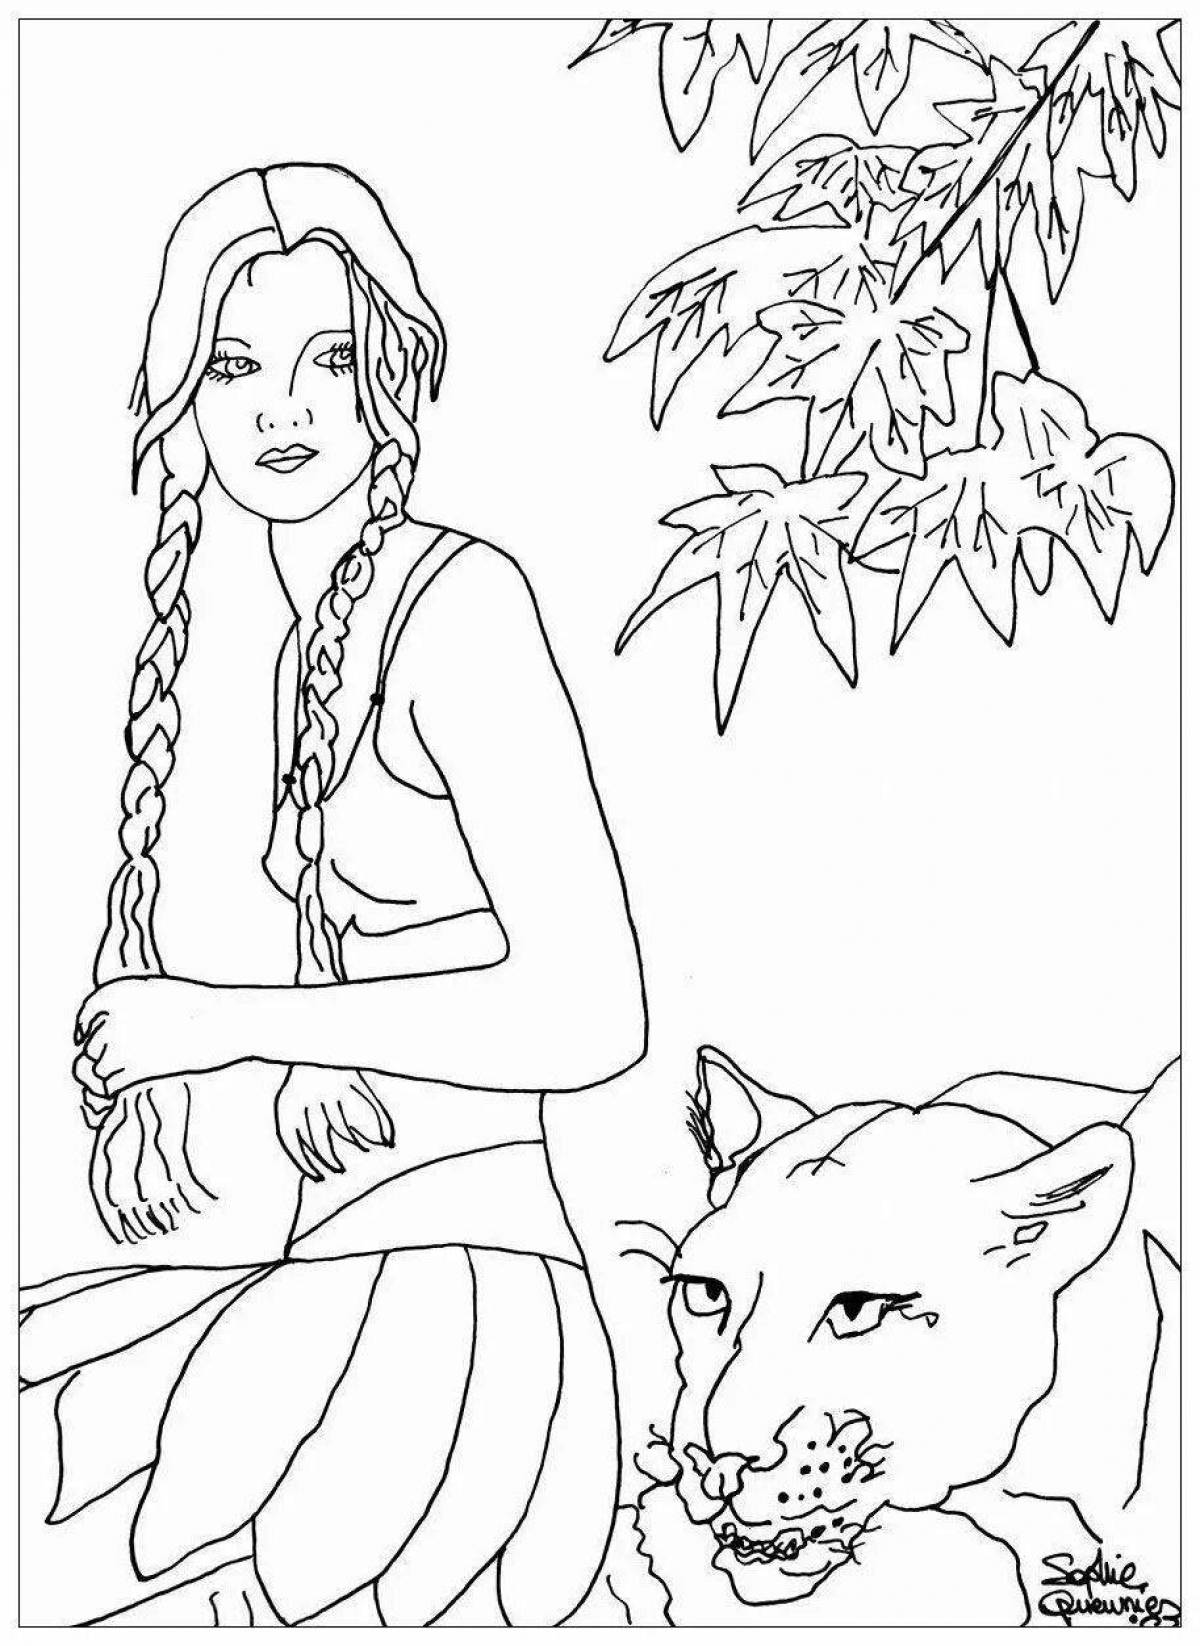 Playful woman coloring book for children